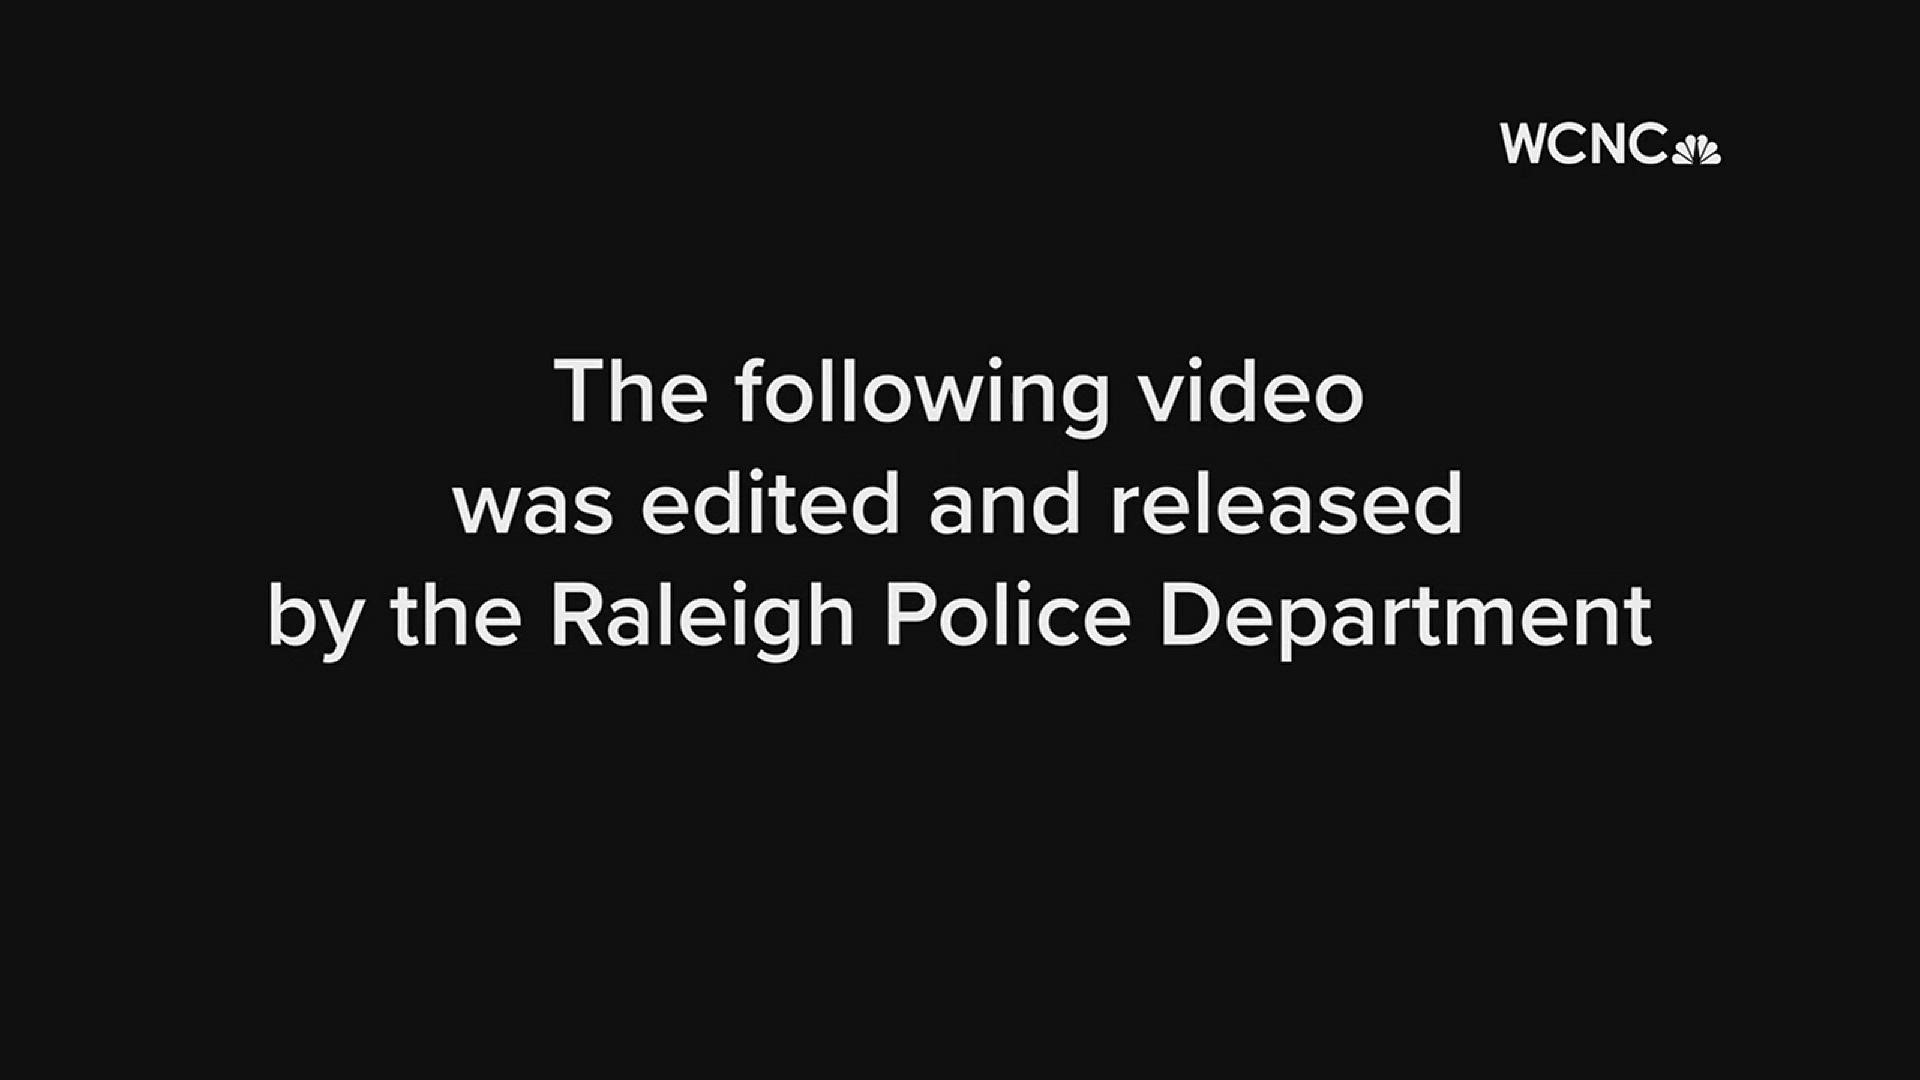 On Friday, the Raleigh Police Department released video of its officers using force during a traffic stop Tuesday. The encounter is under investigation.